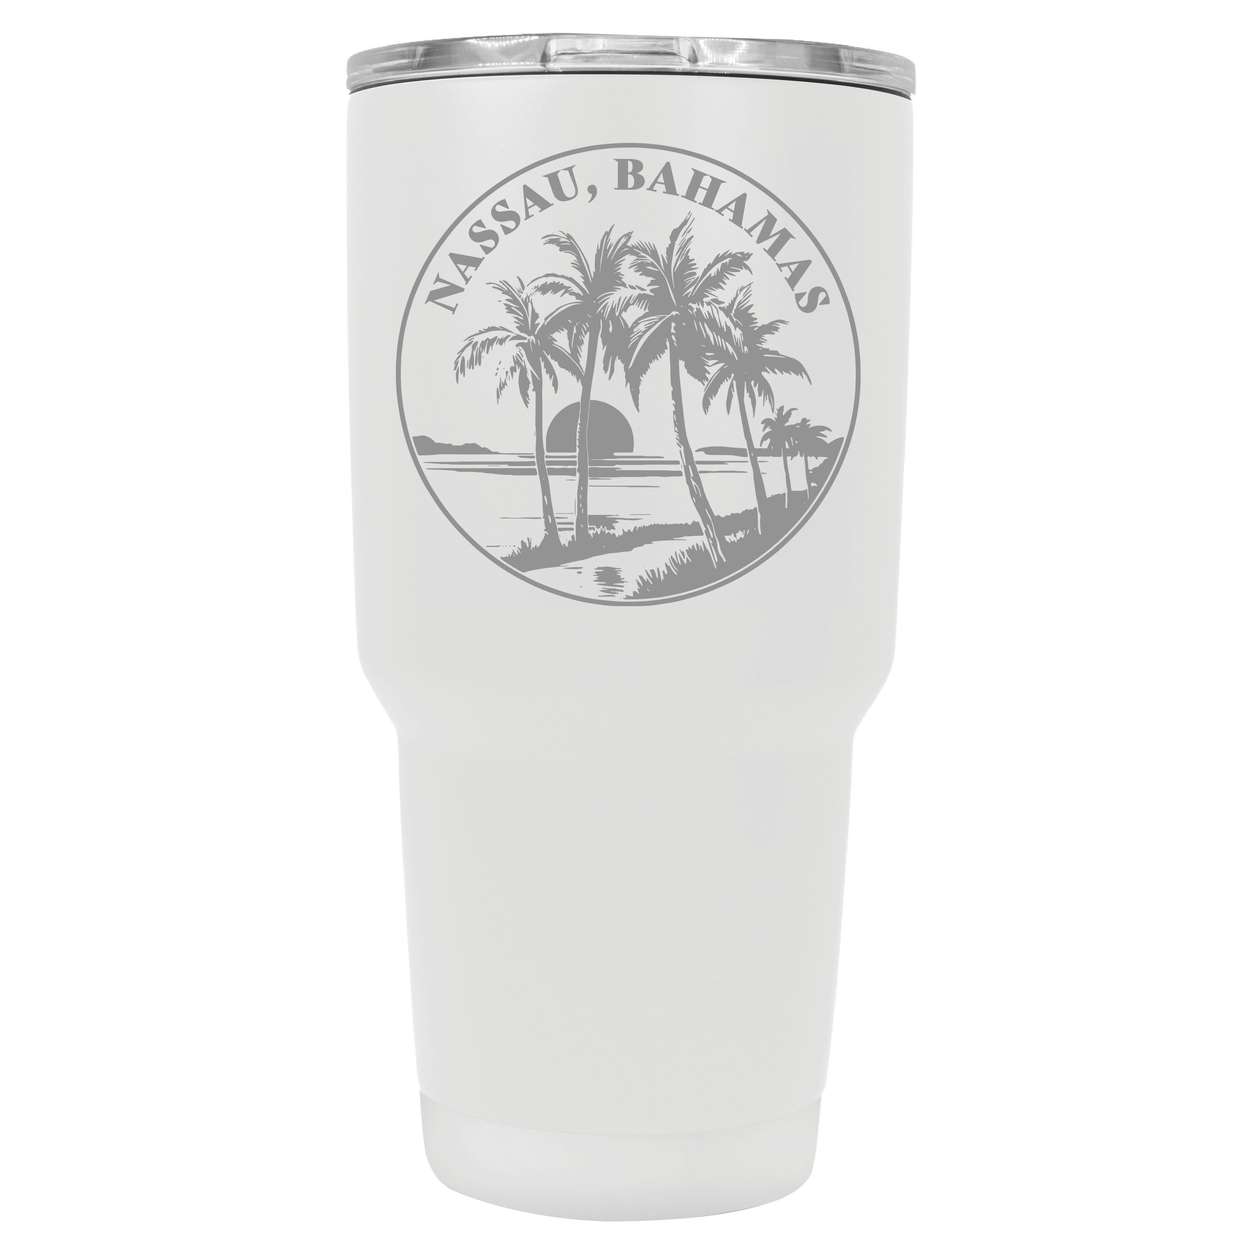 Nassau The Bahamas Souvenir 24 Oz Engraved Insulated Stainless Steel Tumbler - White,,4-Pack